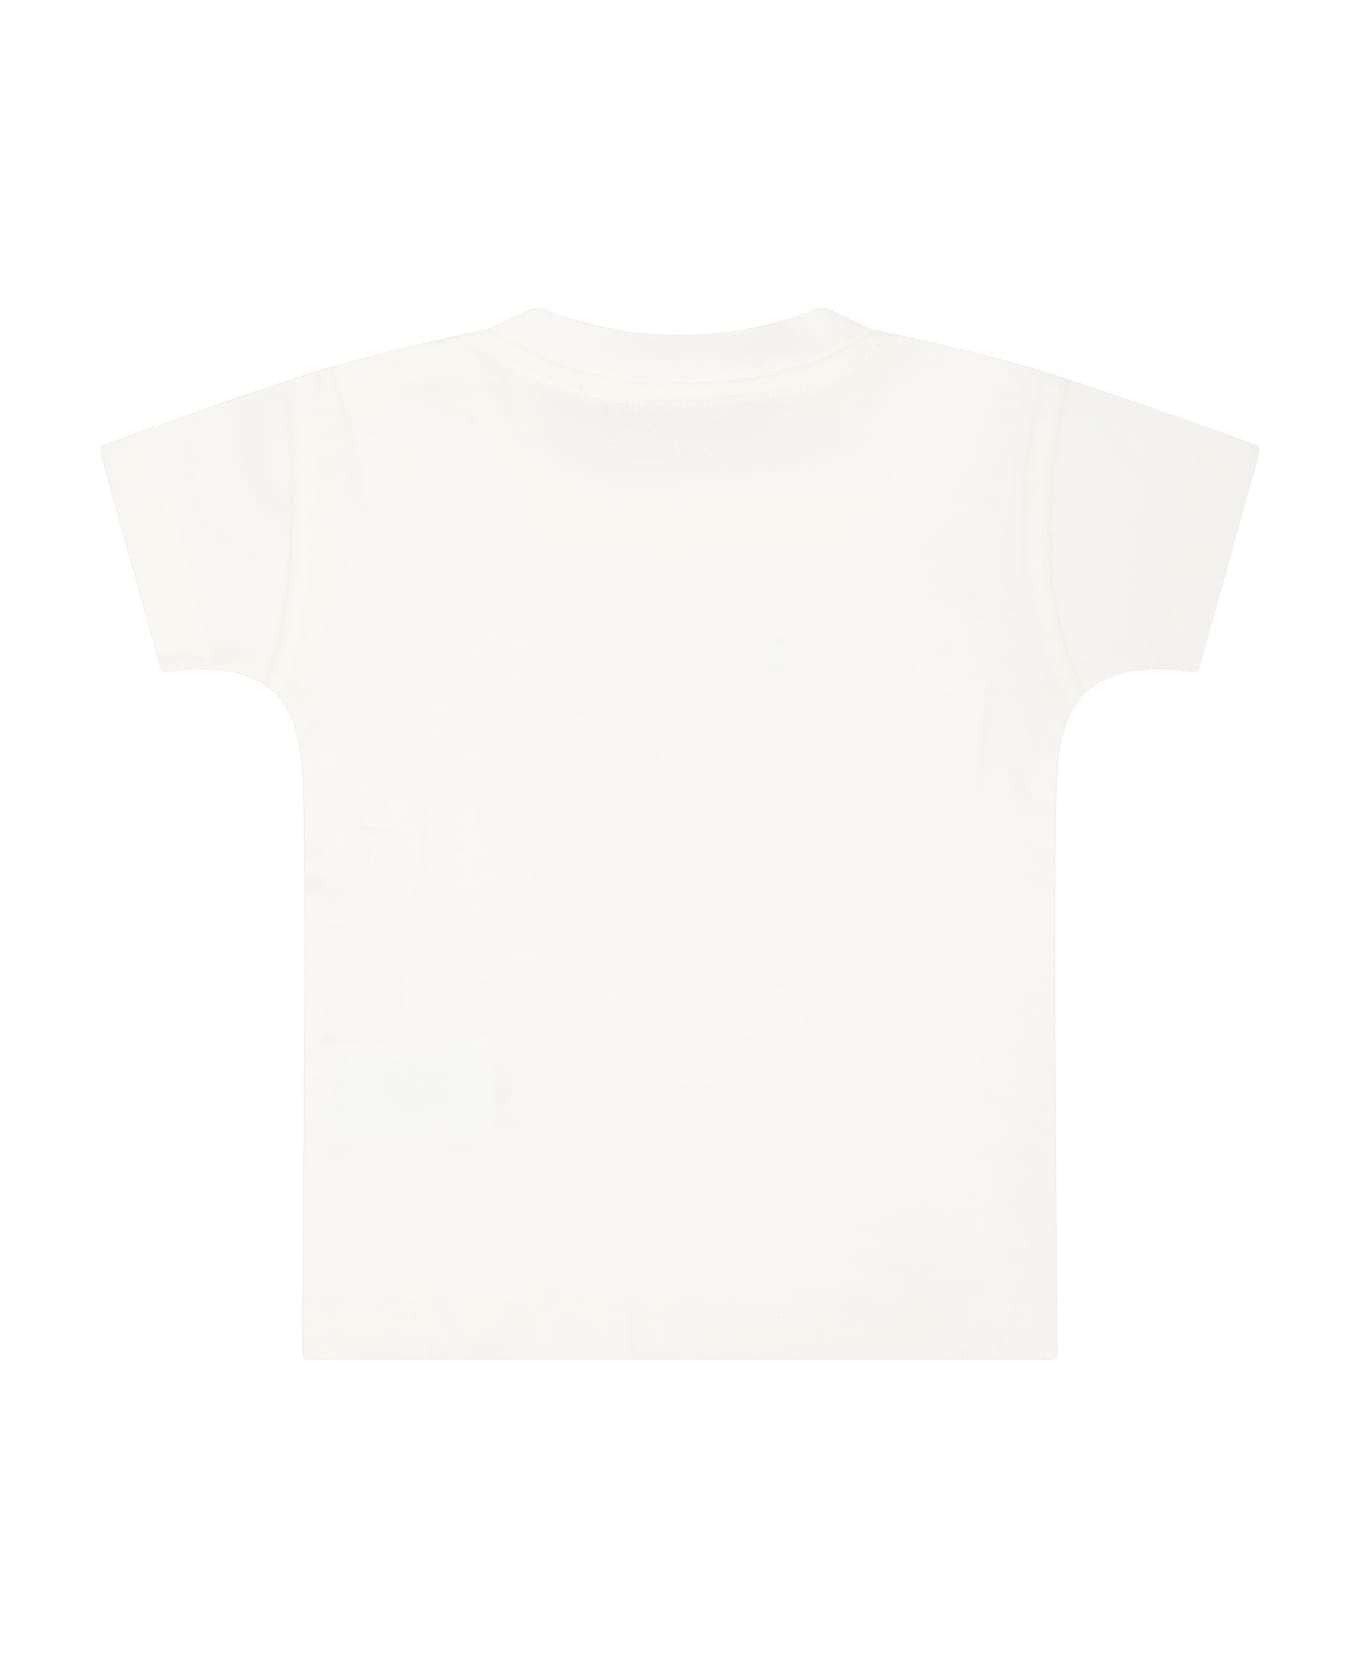 Bonpoint White T-shirt For Baby Girl With Iconic Cherries - White